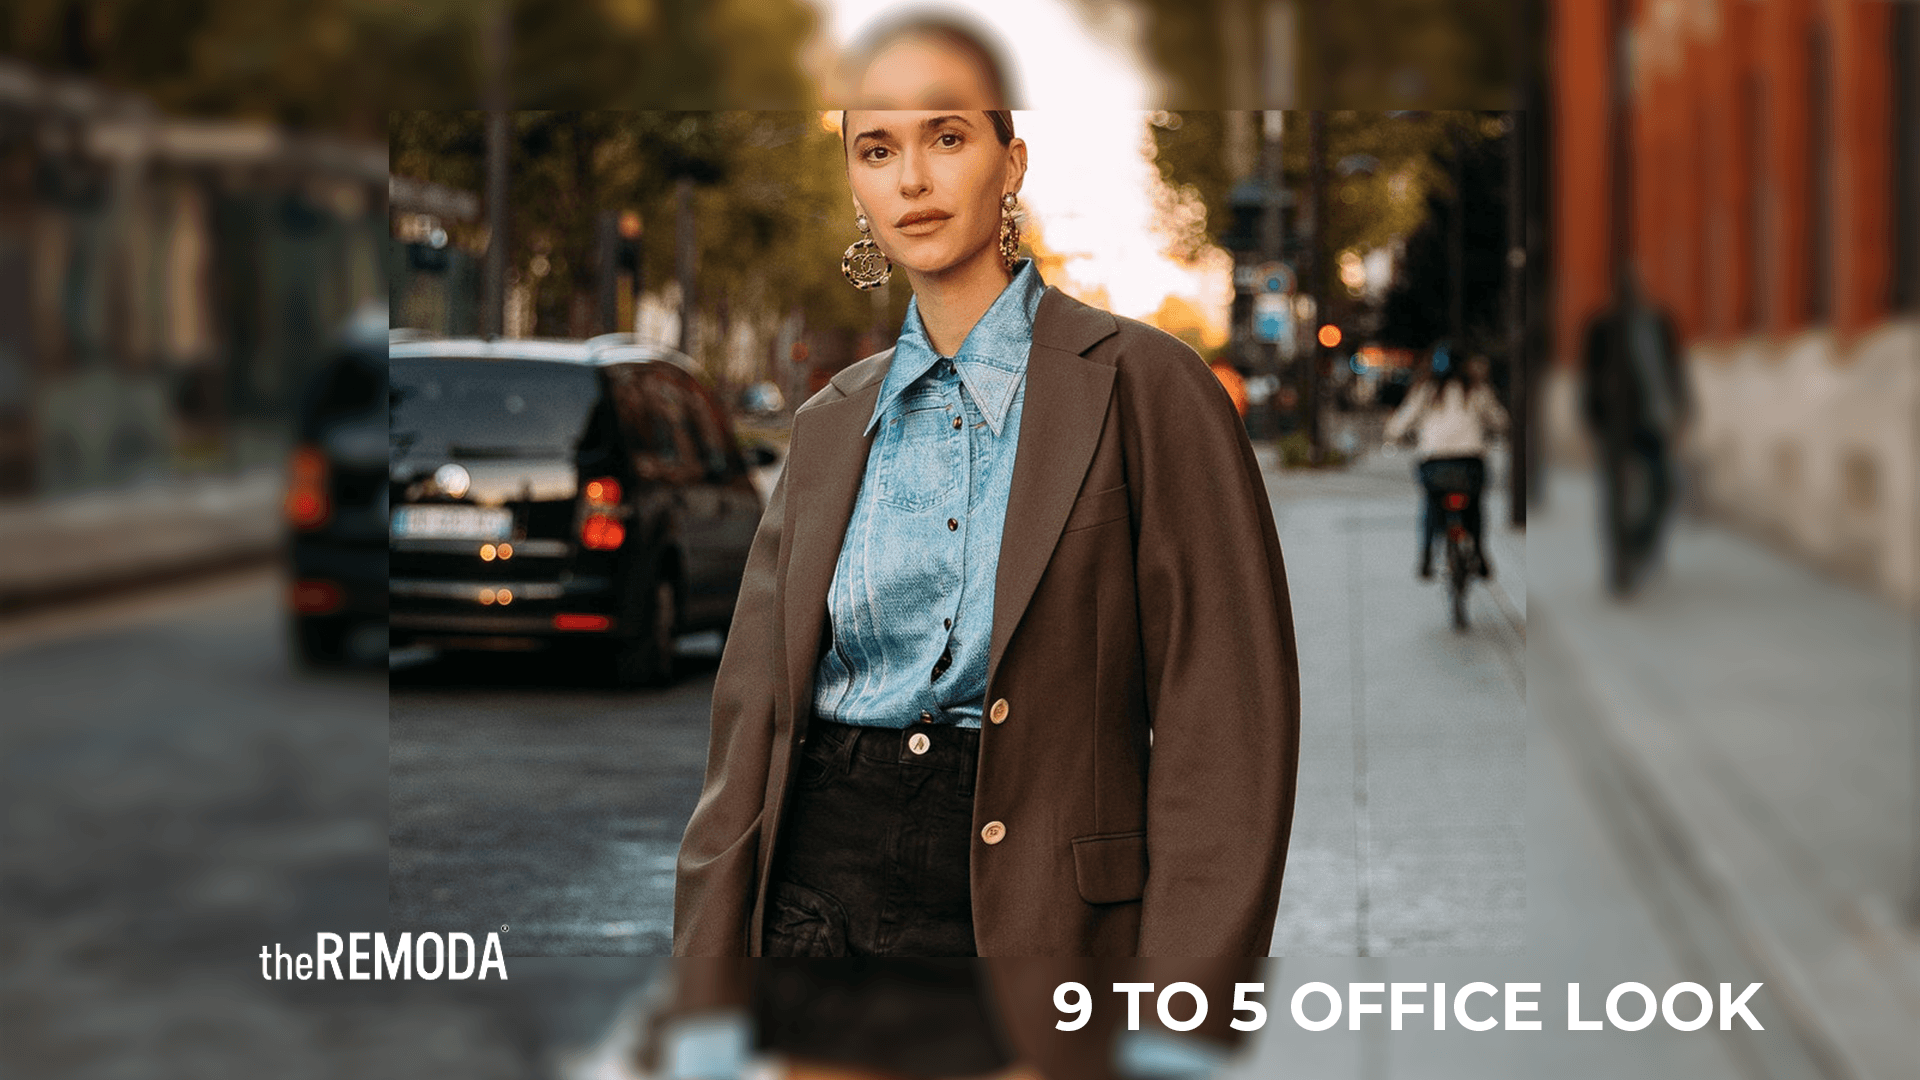 9-to-5 office look - theREMODA